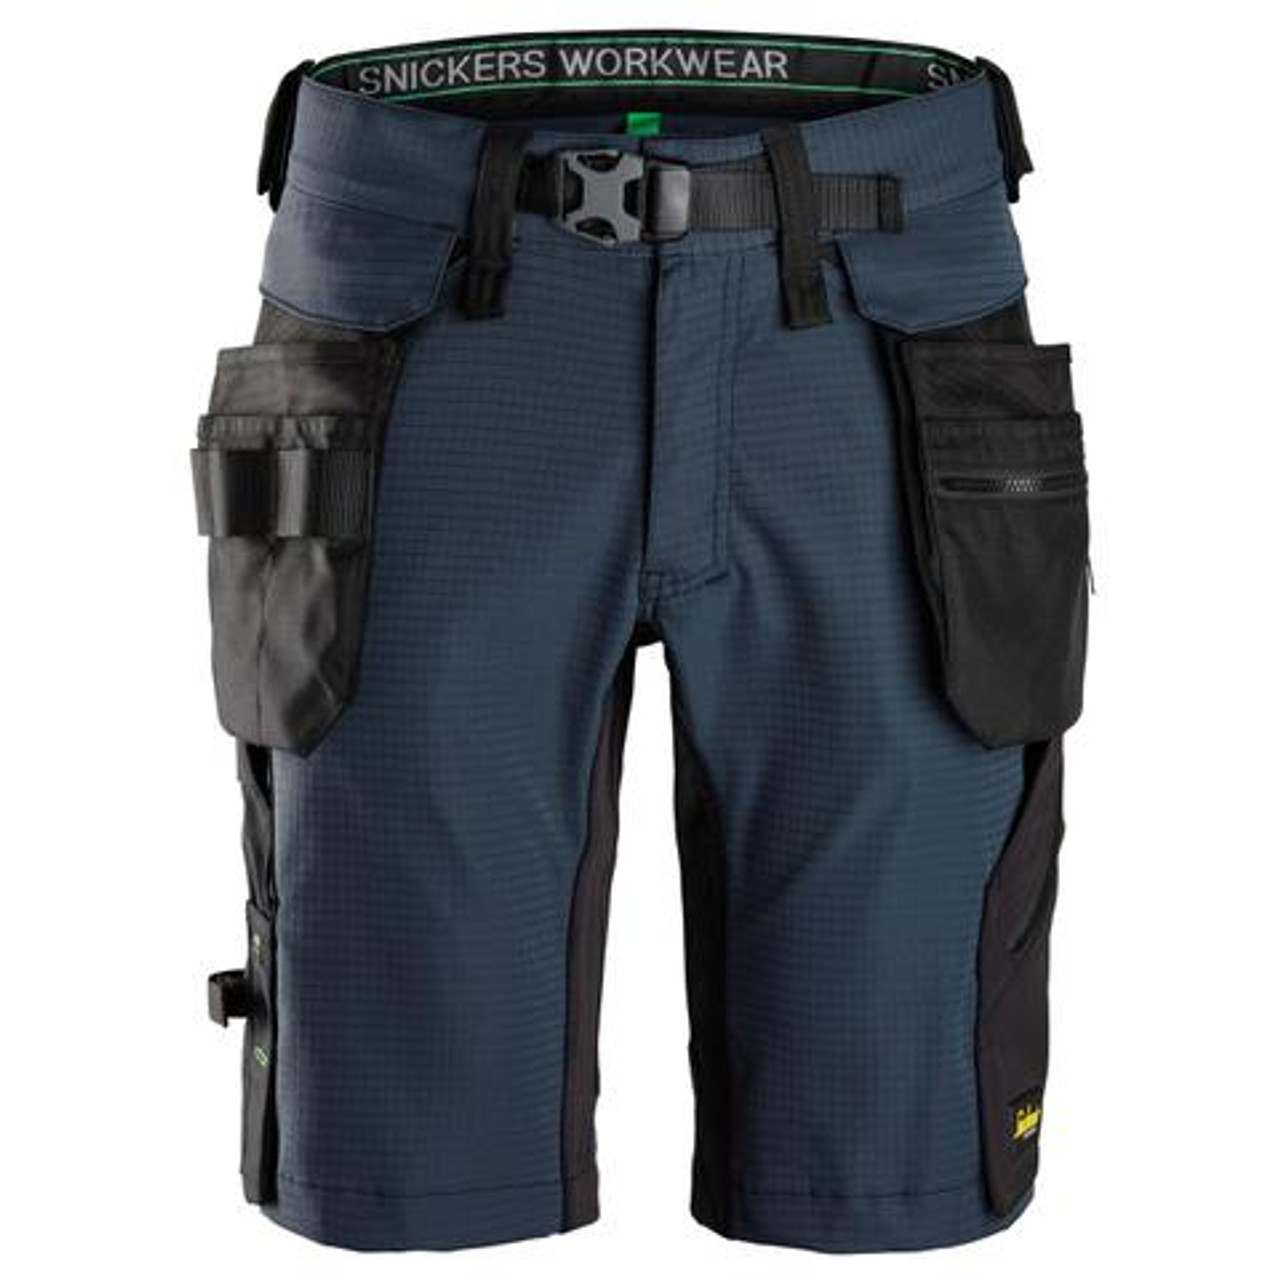 SNICKERS Shorts | 6172 Flexi Work Navy Blue Shorts with Detachable Holster Pockets 2-Way Stretch